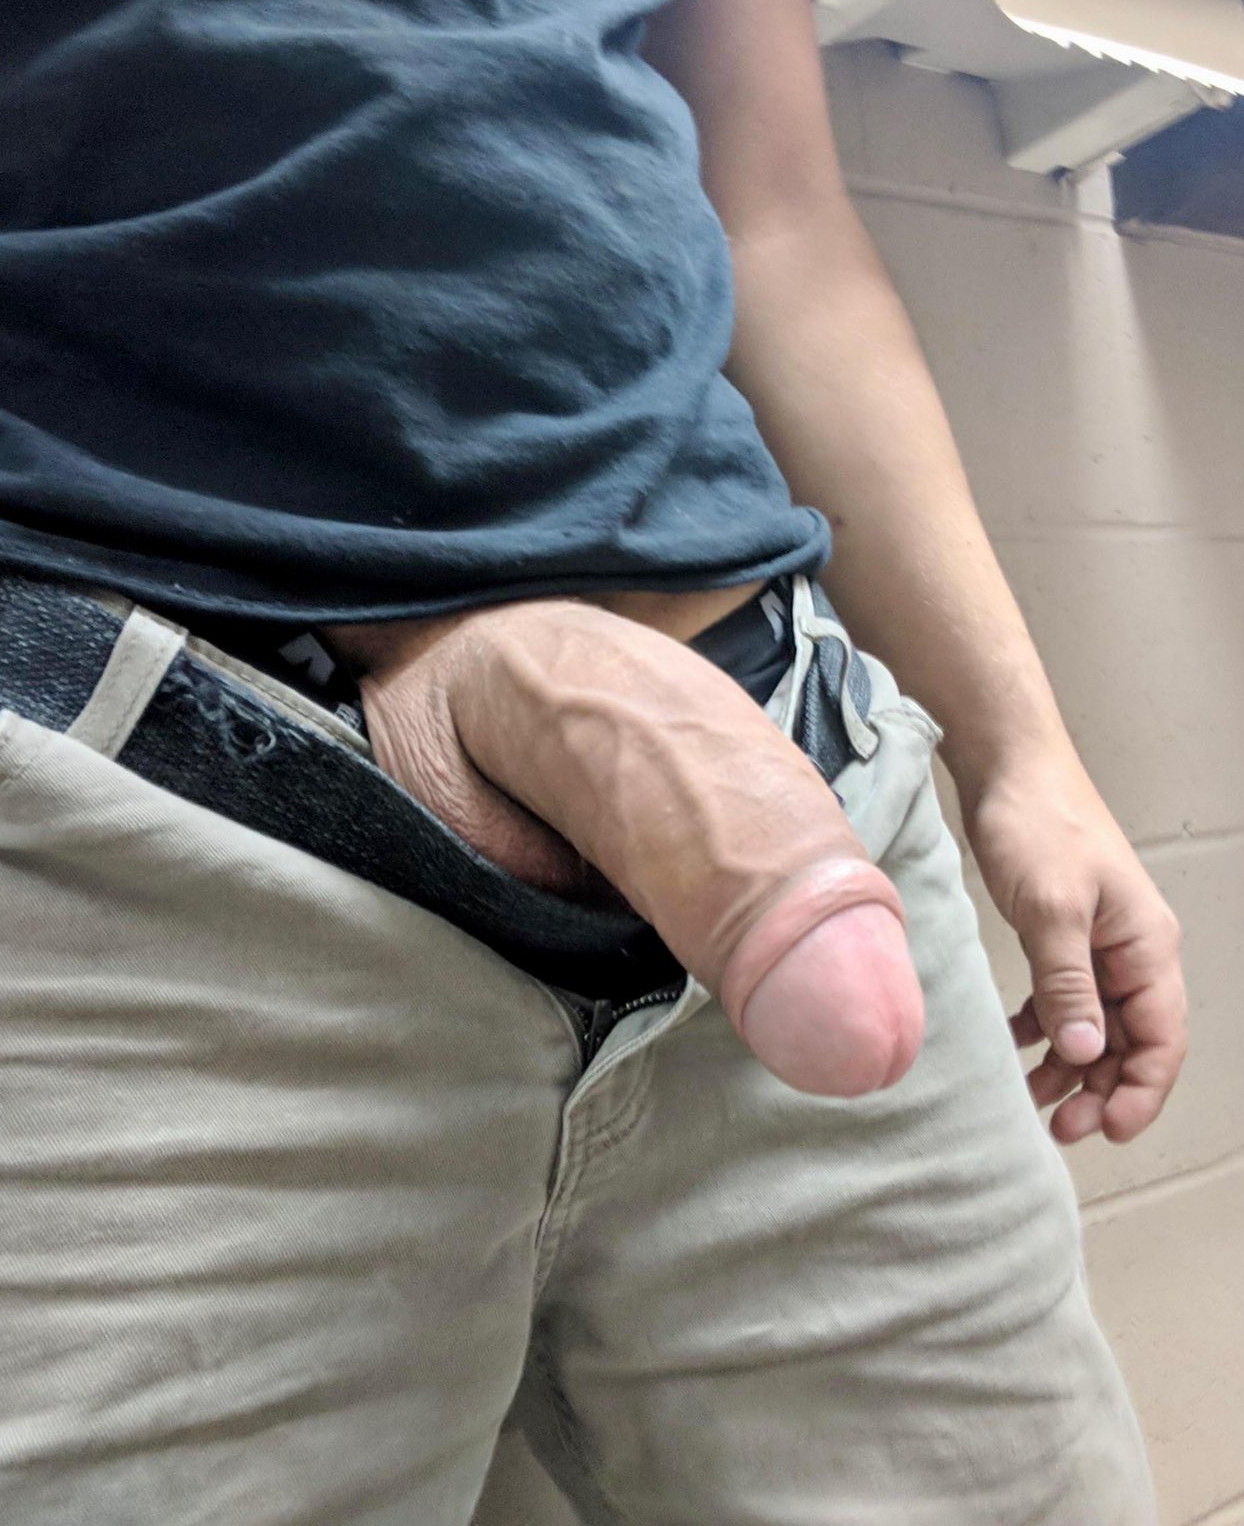 Out Of Huge Hard Cock Pants - Thick dick out of pants - Penis Pictures